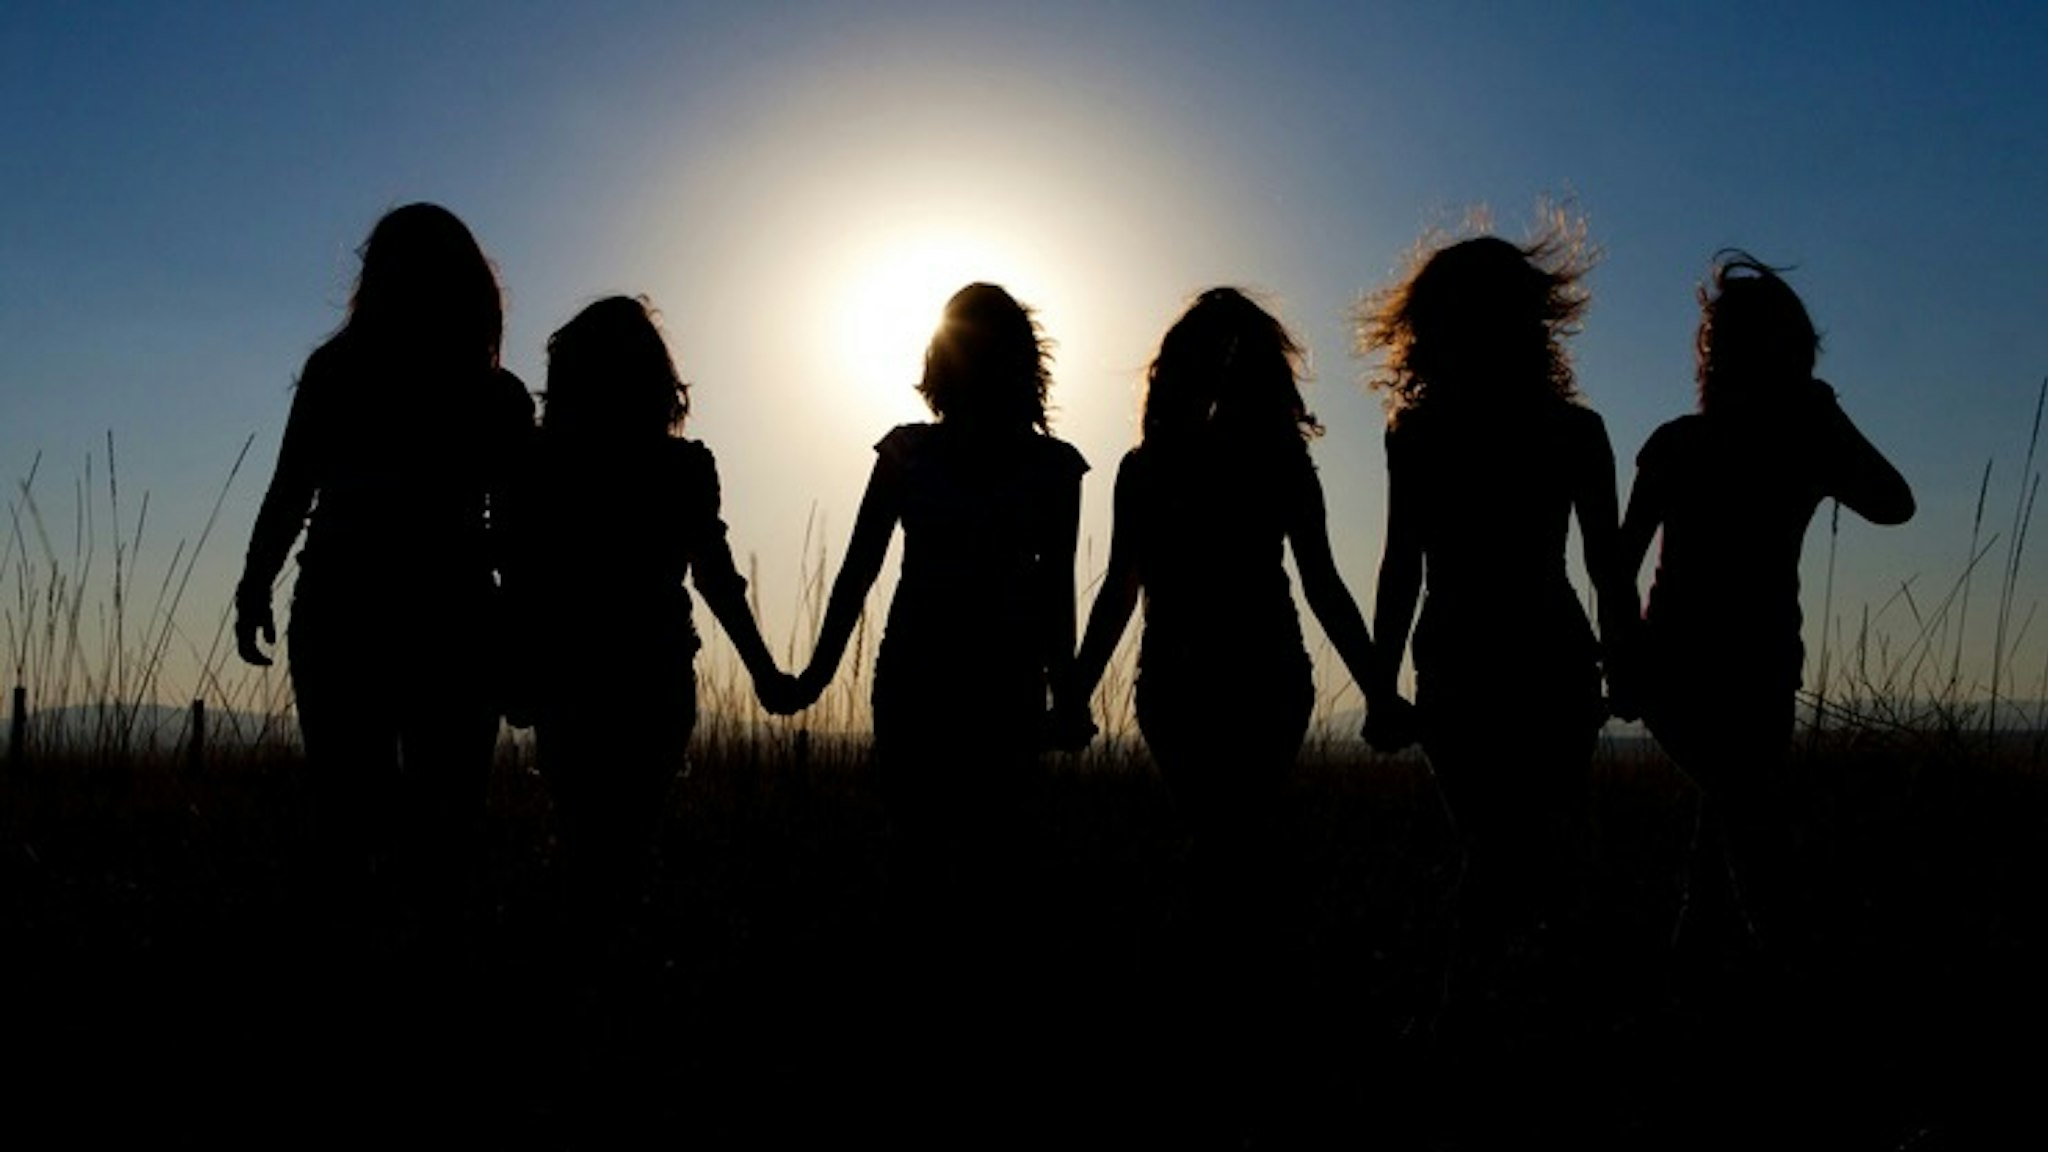 Silhouettes of girls walking in tall grass - stock photo Holly Wilmeth via Getty Images